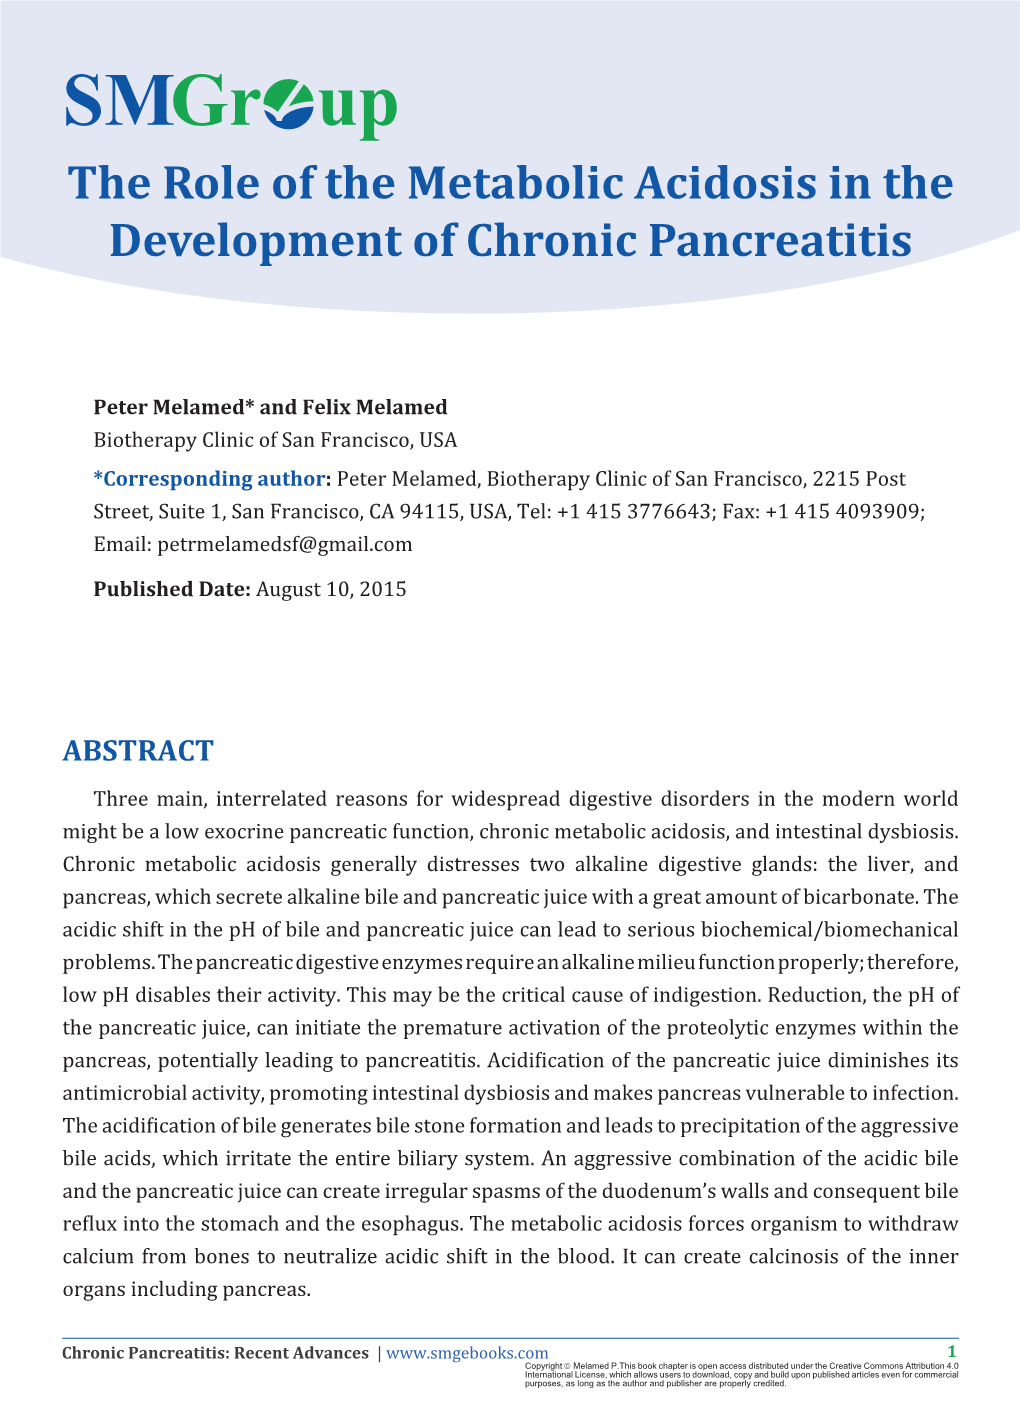 The Role of the Metabolic Acidosis in the Development of Chronic Pancreatitis